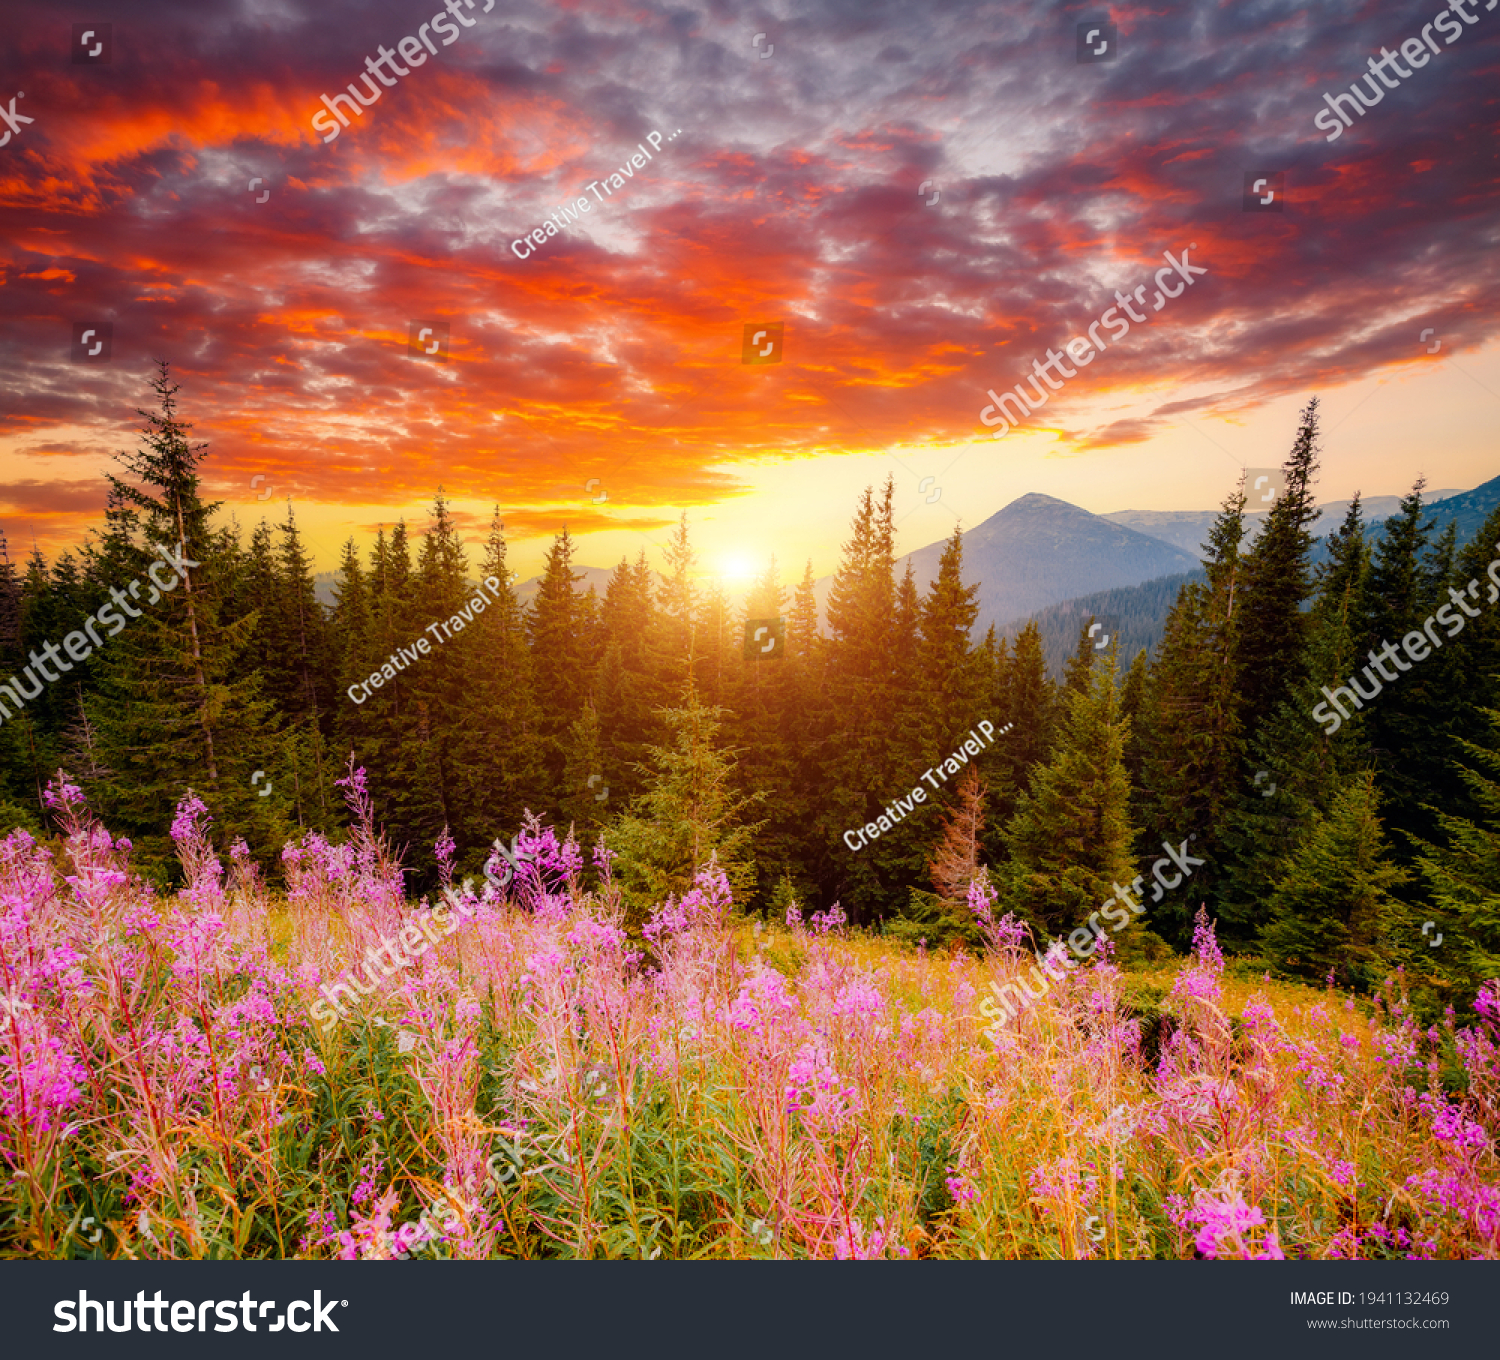 Spectacular sunset in the valley of the mountains. Location place Carpathian mountains, Ukraine, Europe. Vibrant photo wallpaper. Picturesque nature photography. Discover the beauty of earth. #1941132469